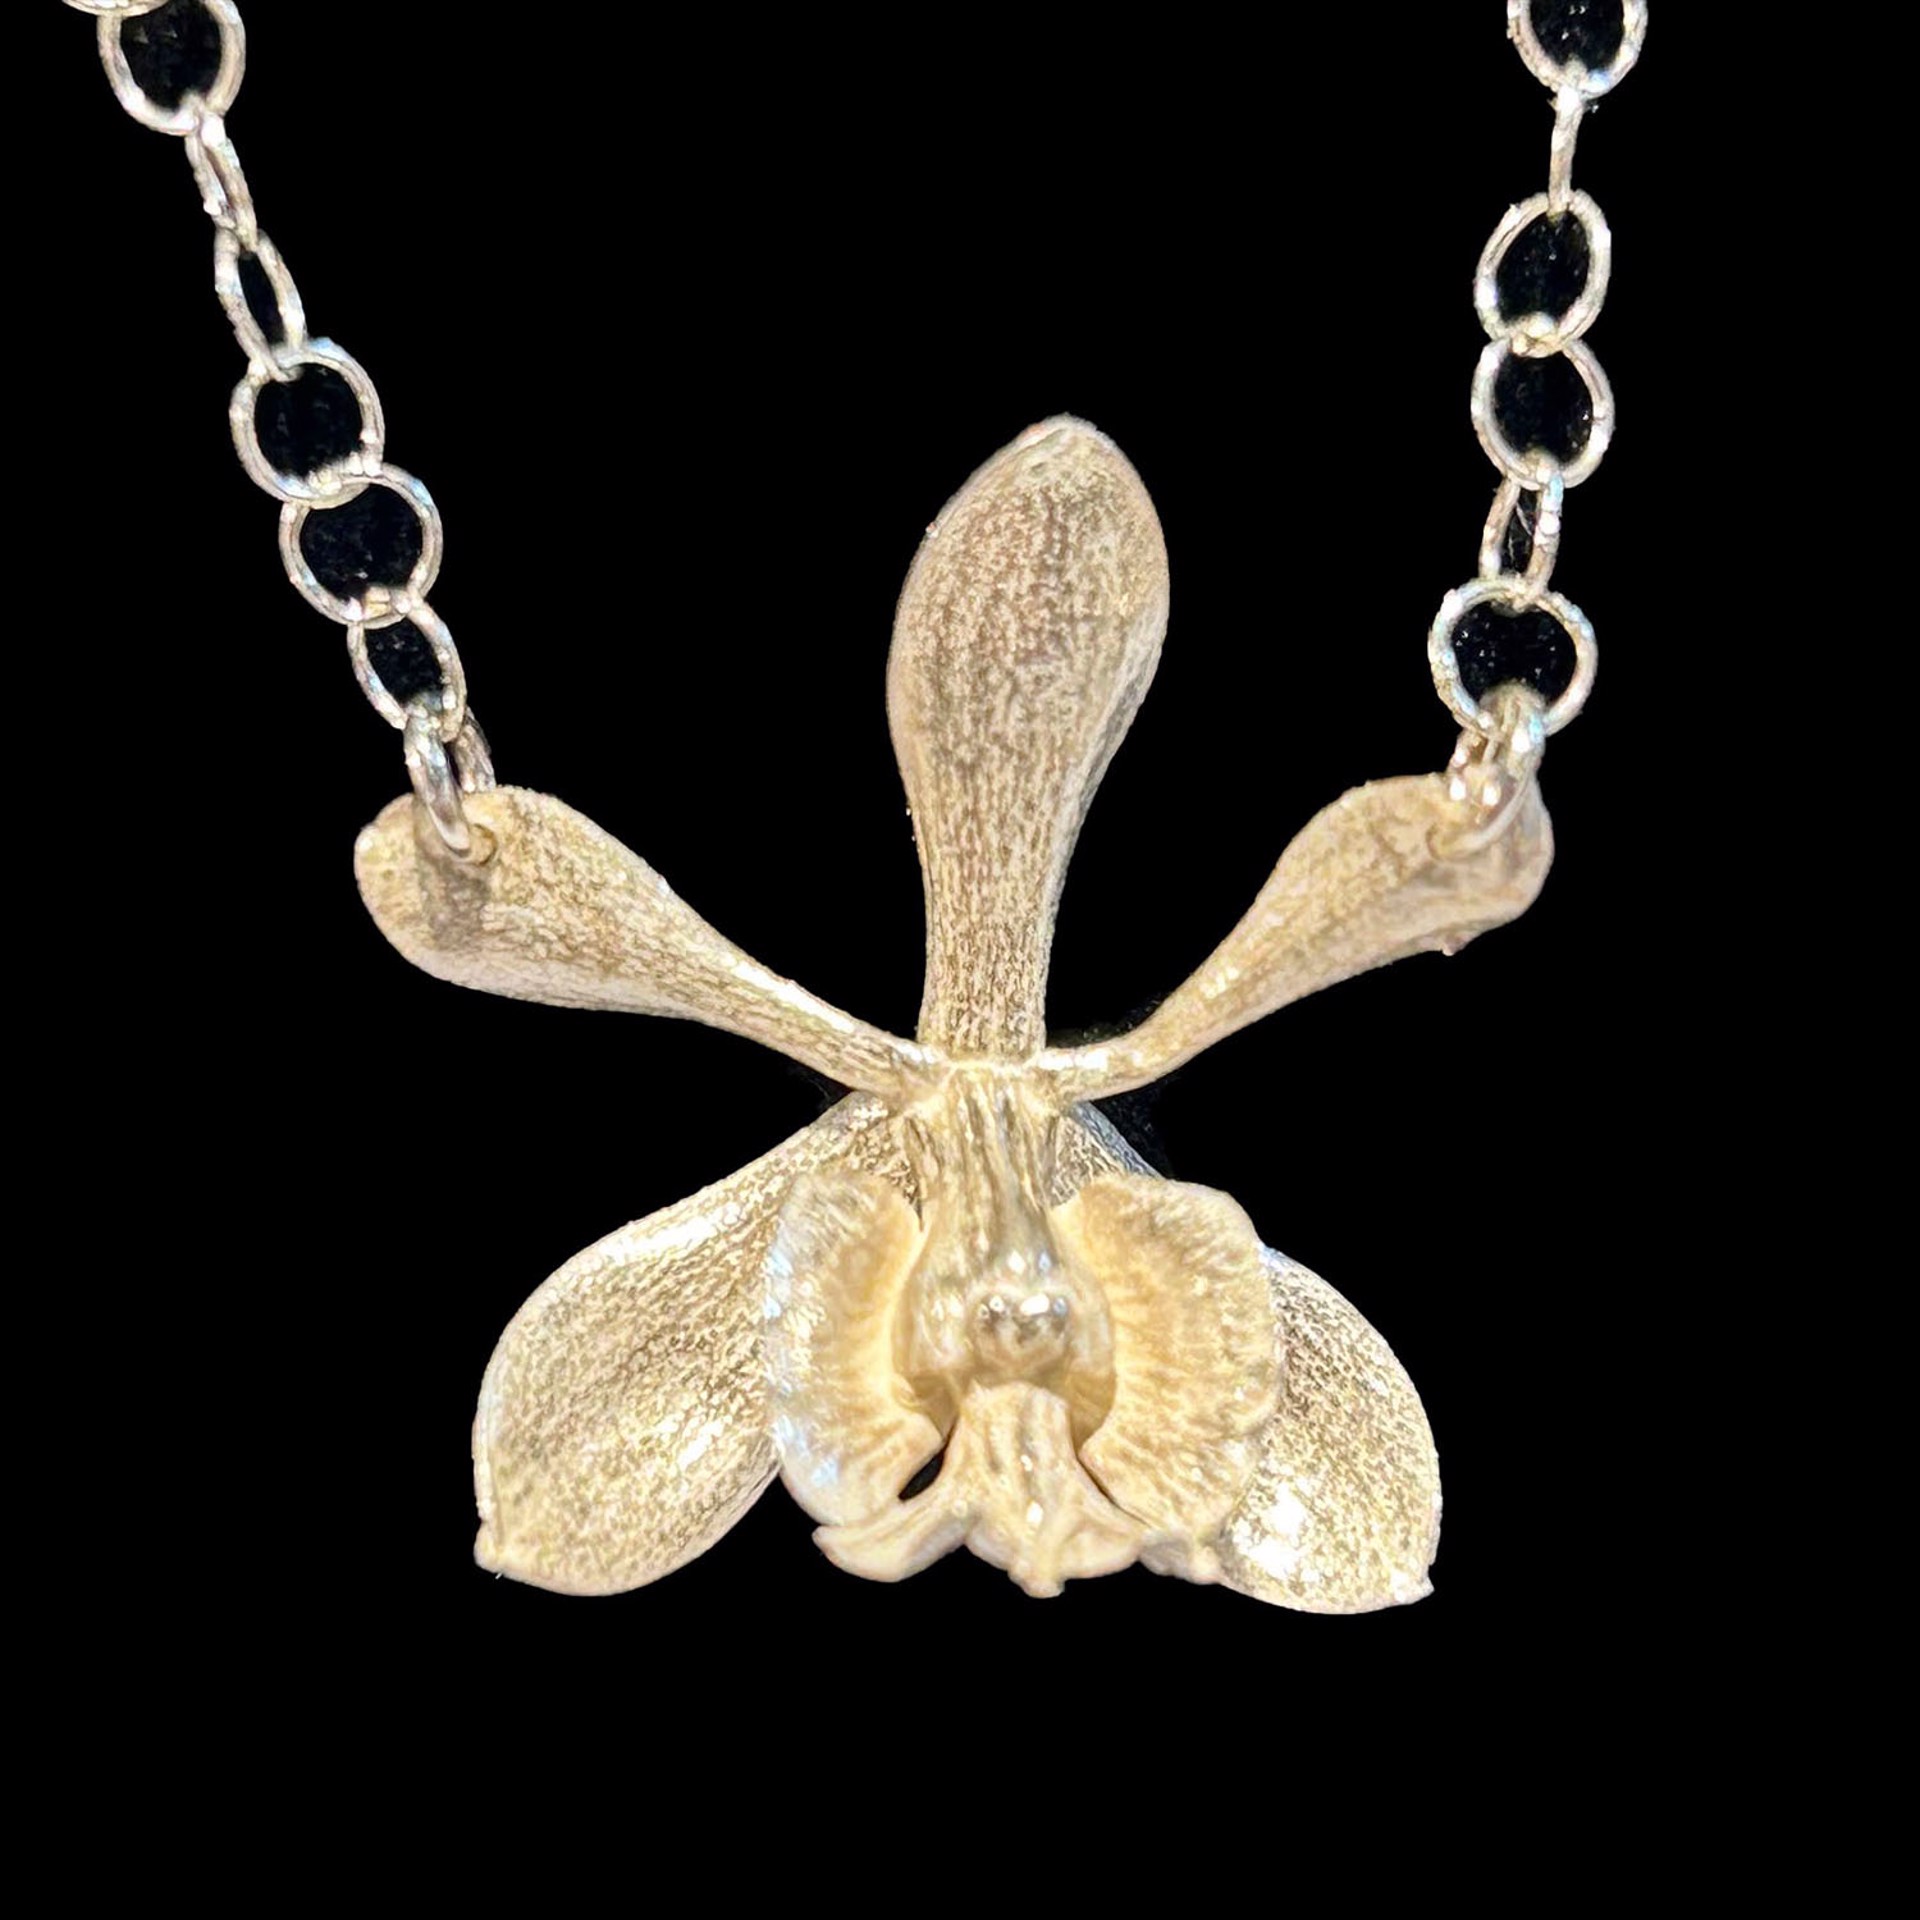 Med Single Orchid Necklace by Wayne Keeth